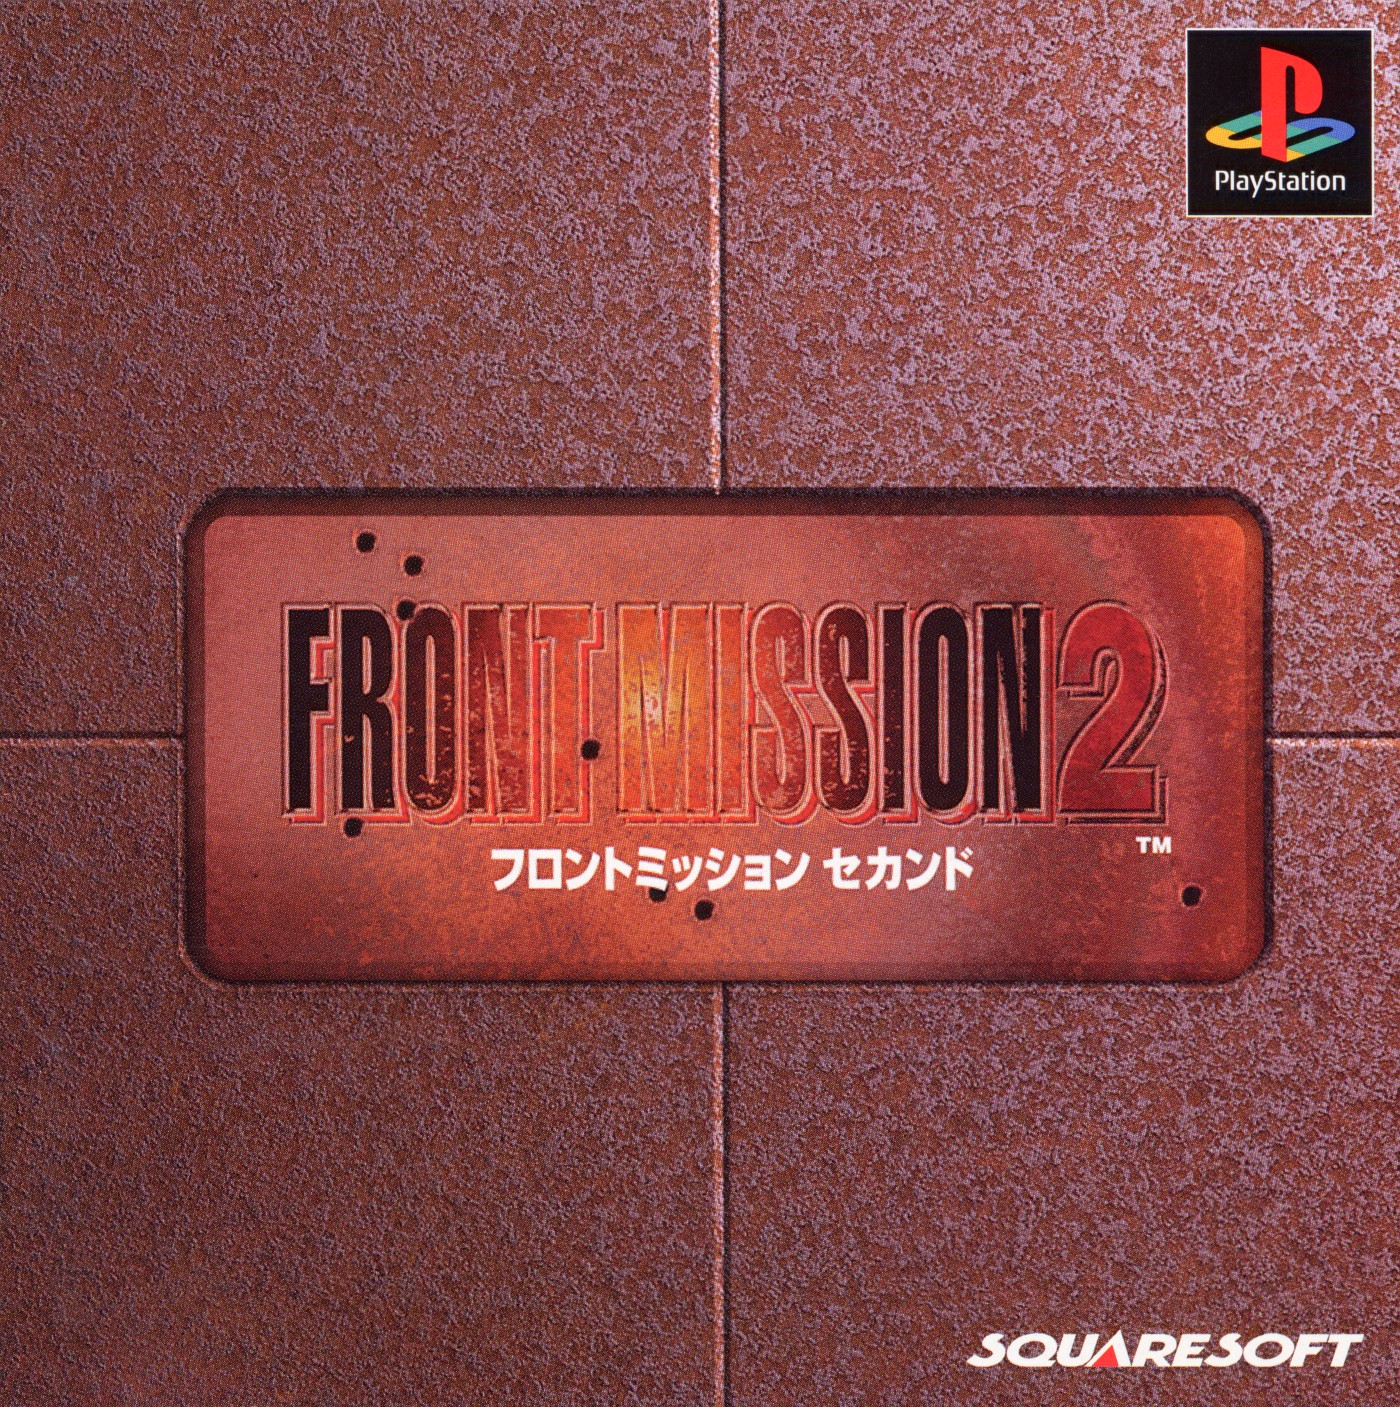 download front mission remakes